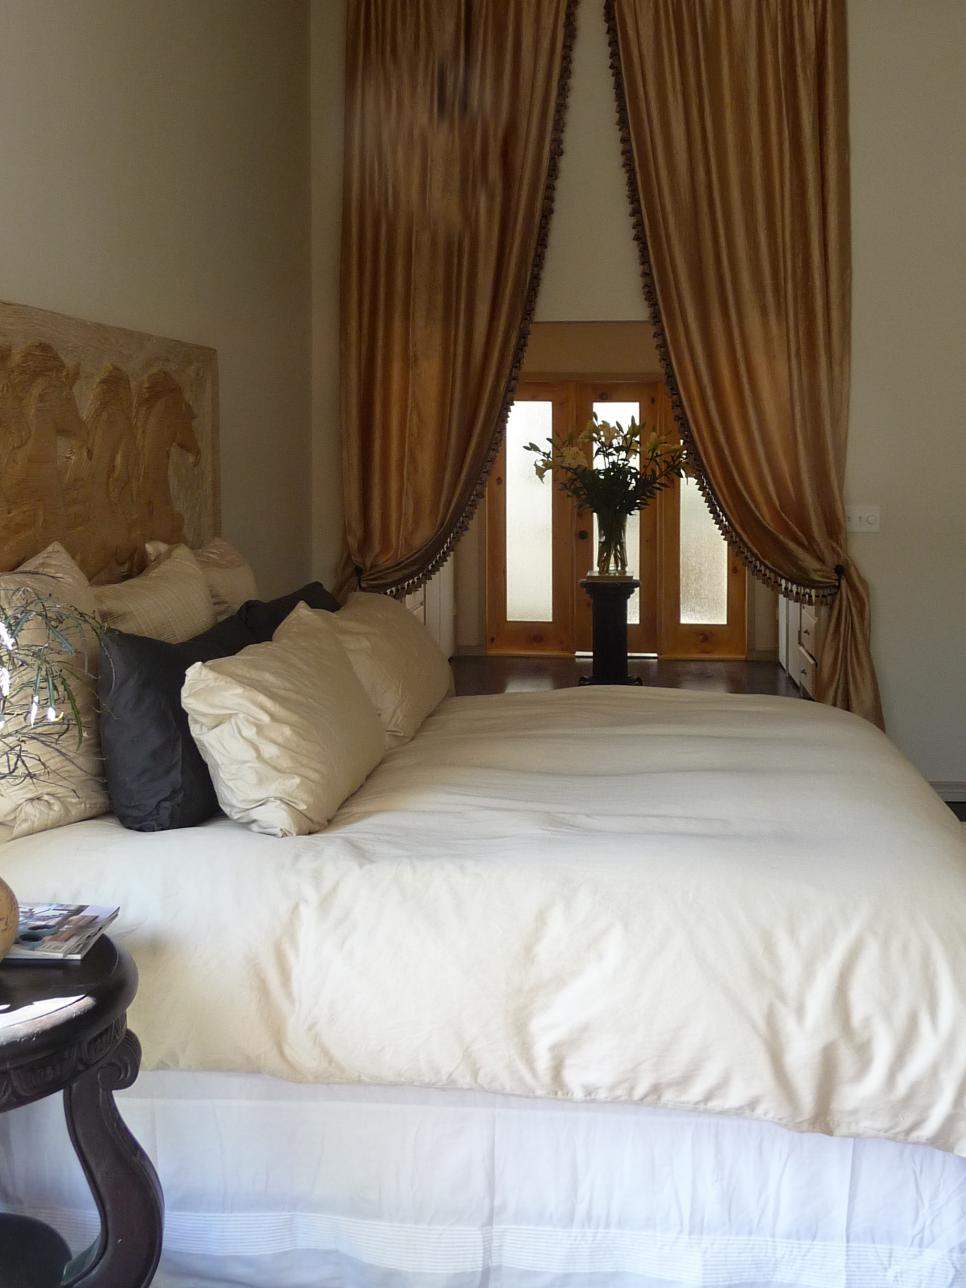 Transitional Bedroom With Plush White Bed and Gold Drapes